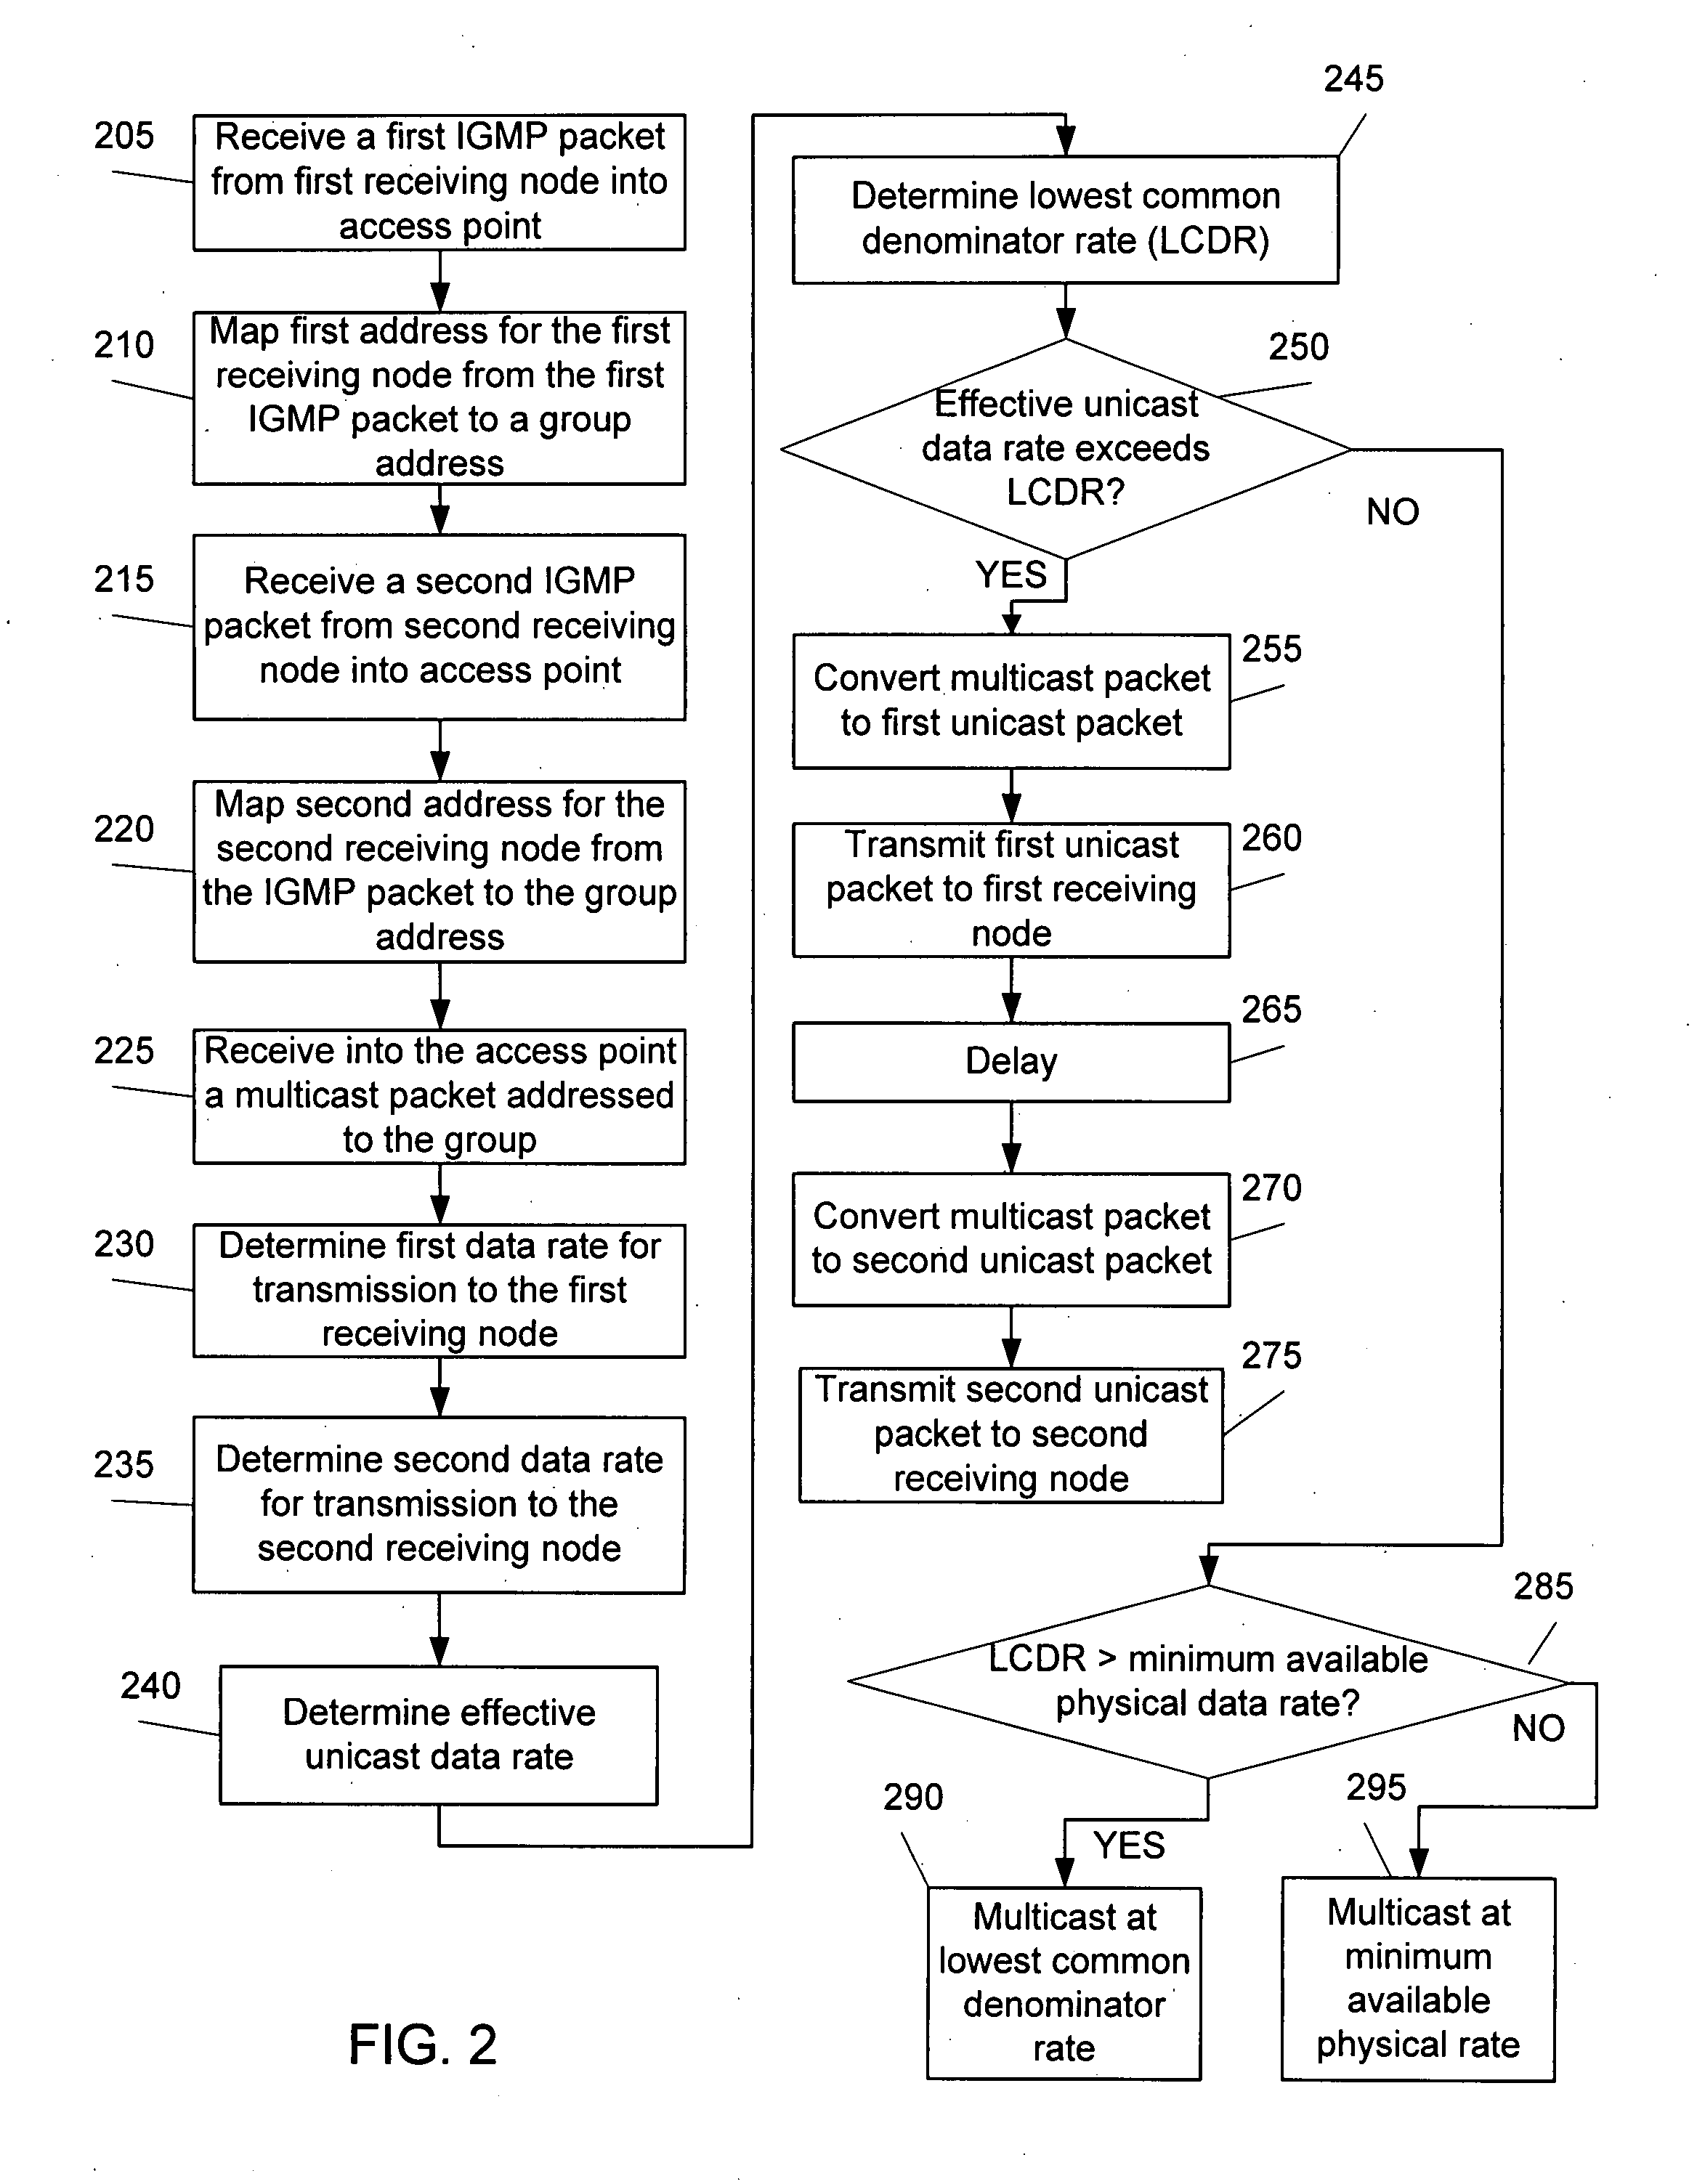 Communications throughput with multiple physical data rate transmission determinations